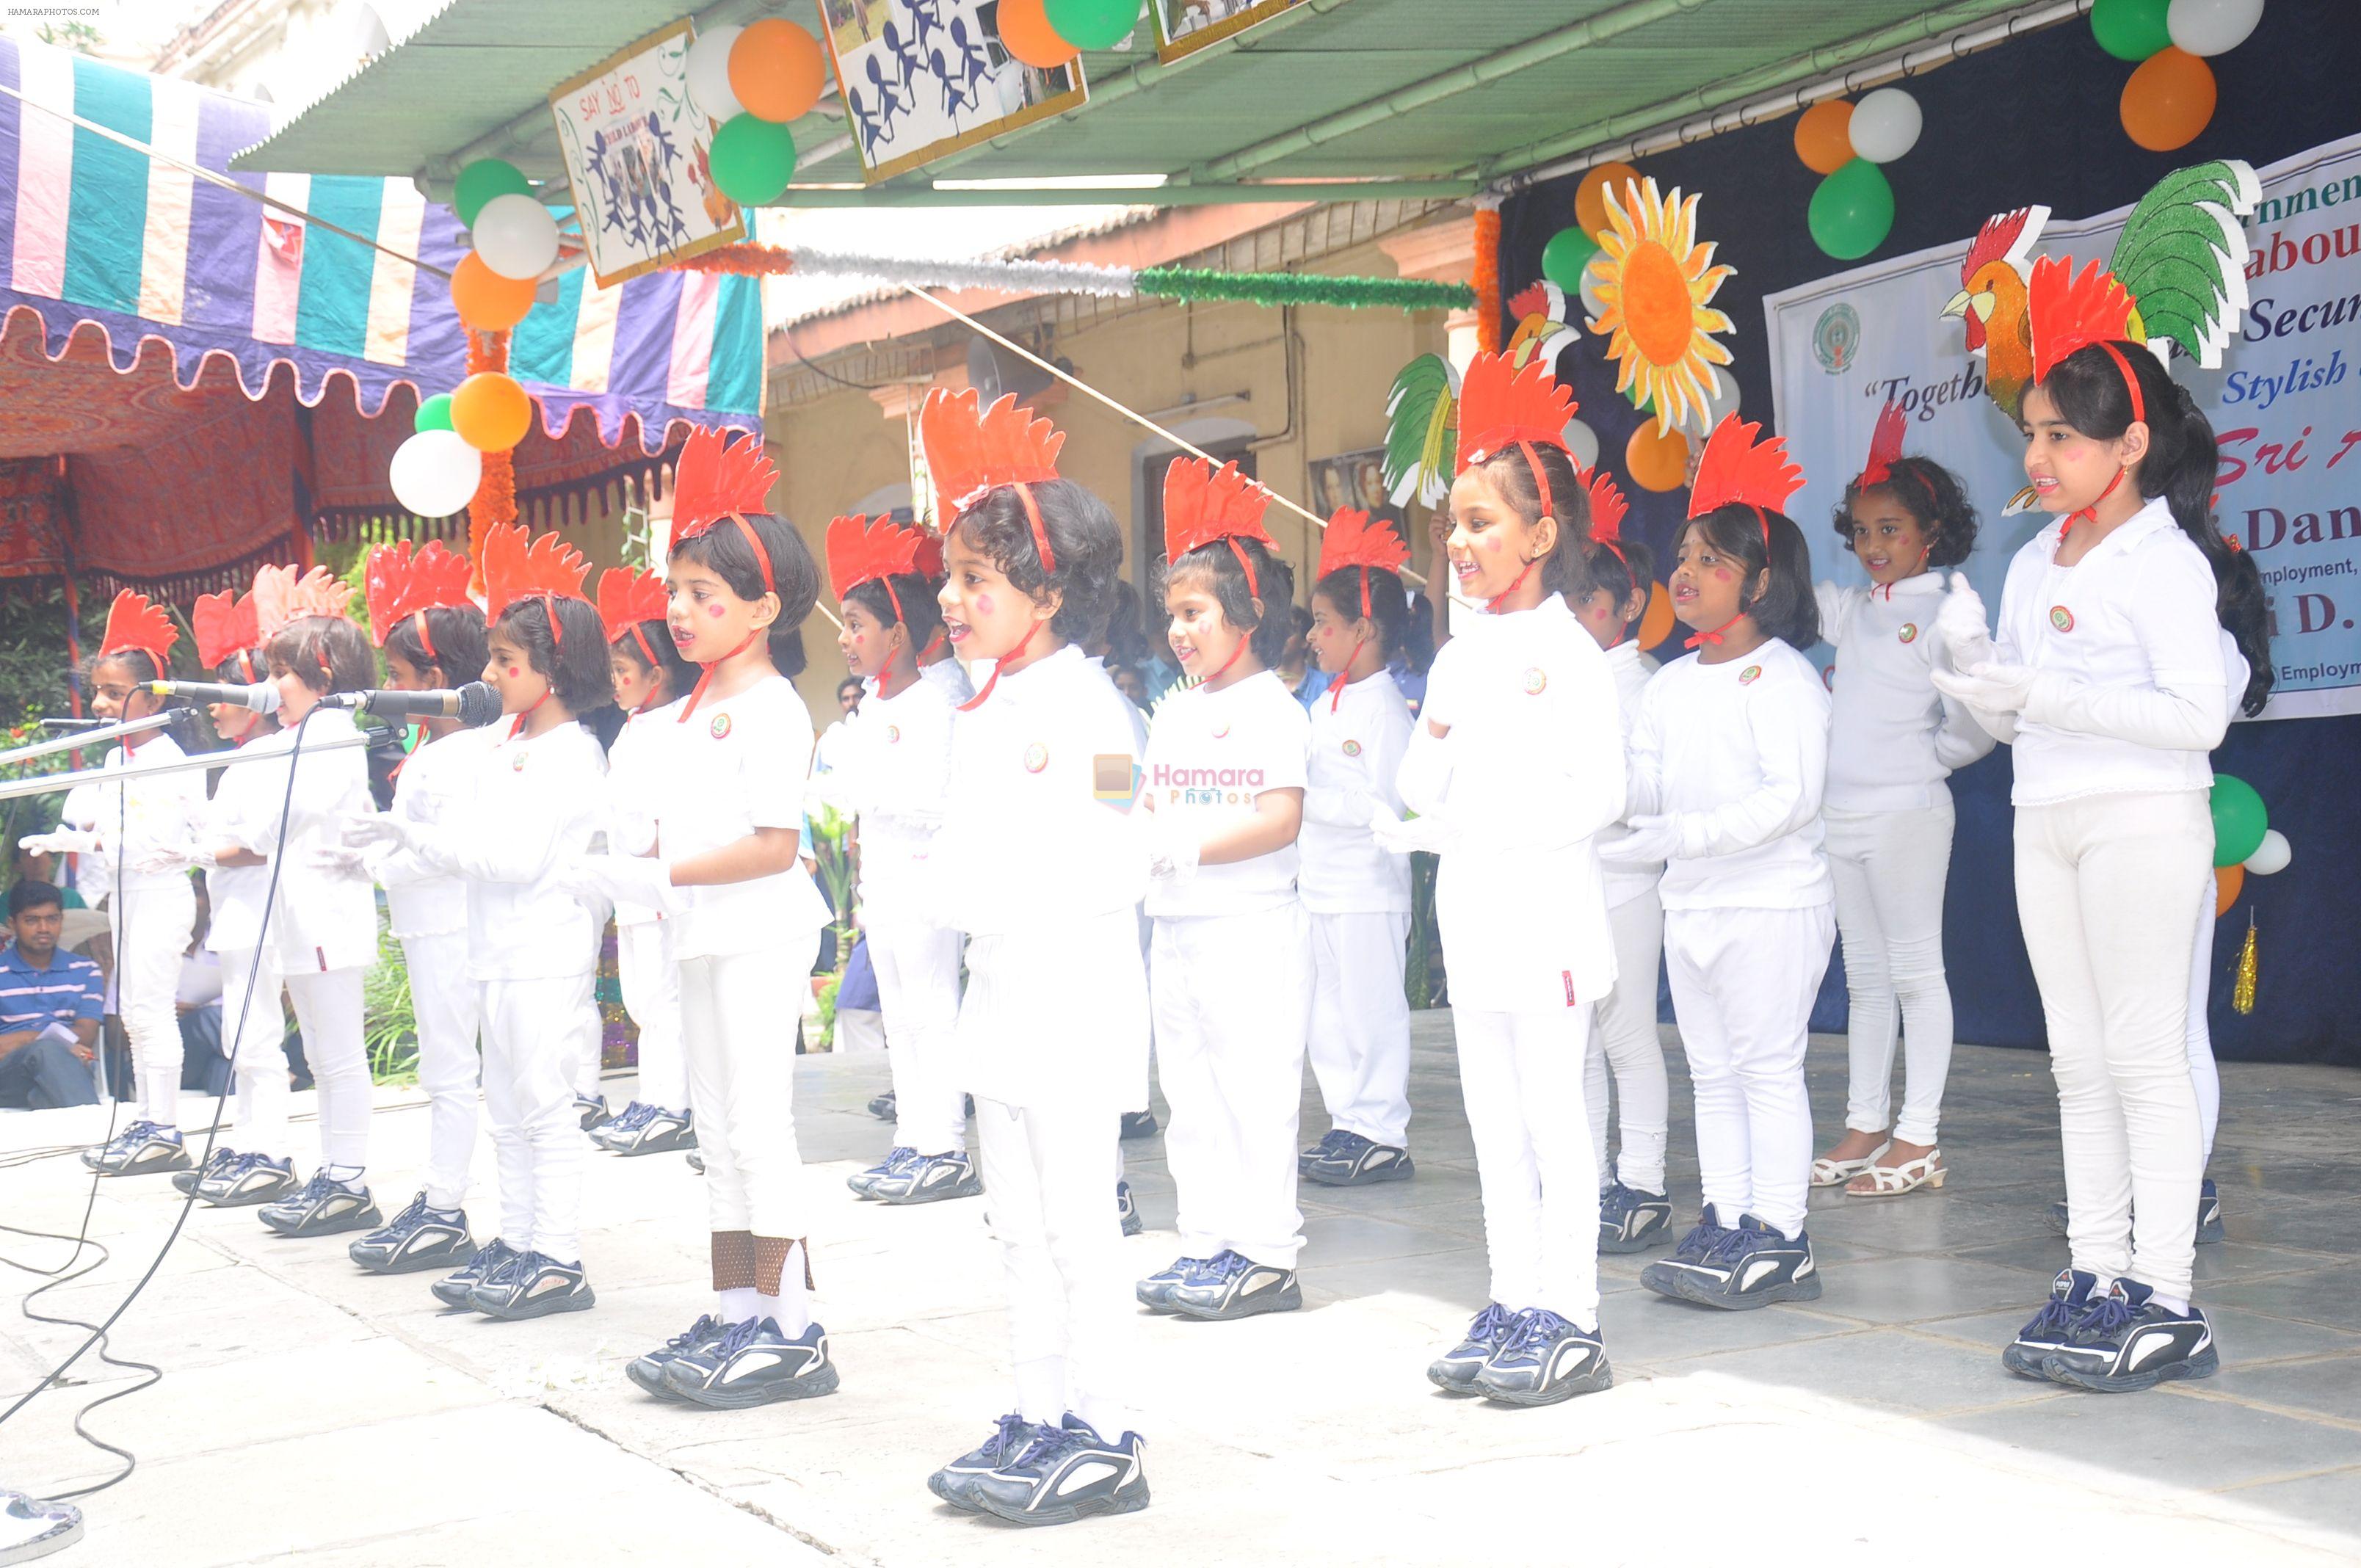 No Child Labour Event on 16th September 2011  at St. Ann's High School in Secunderabad